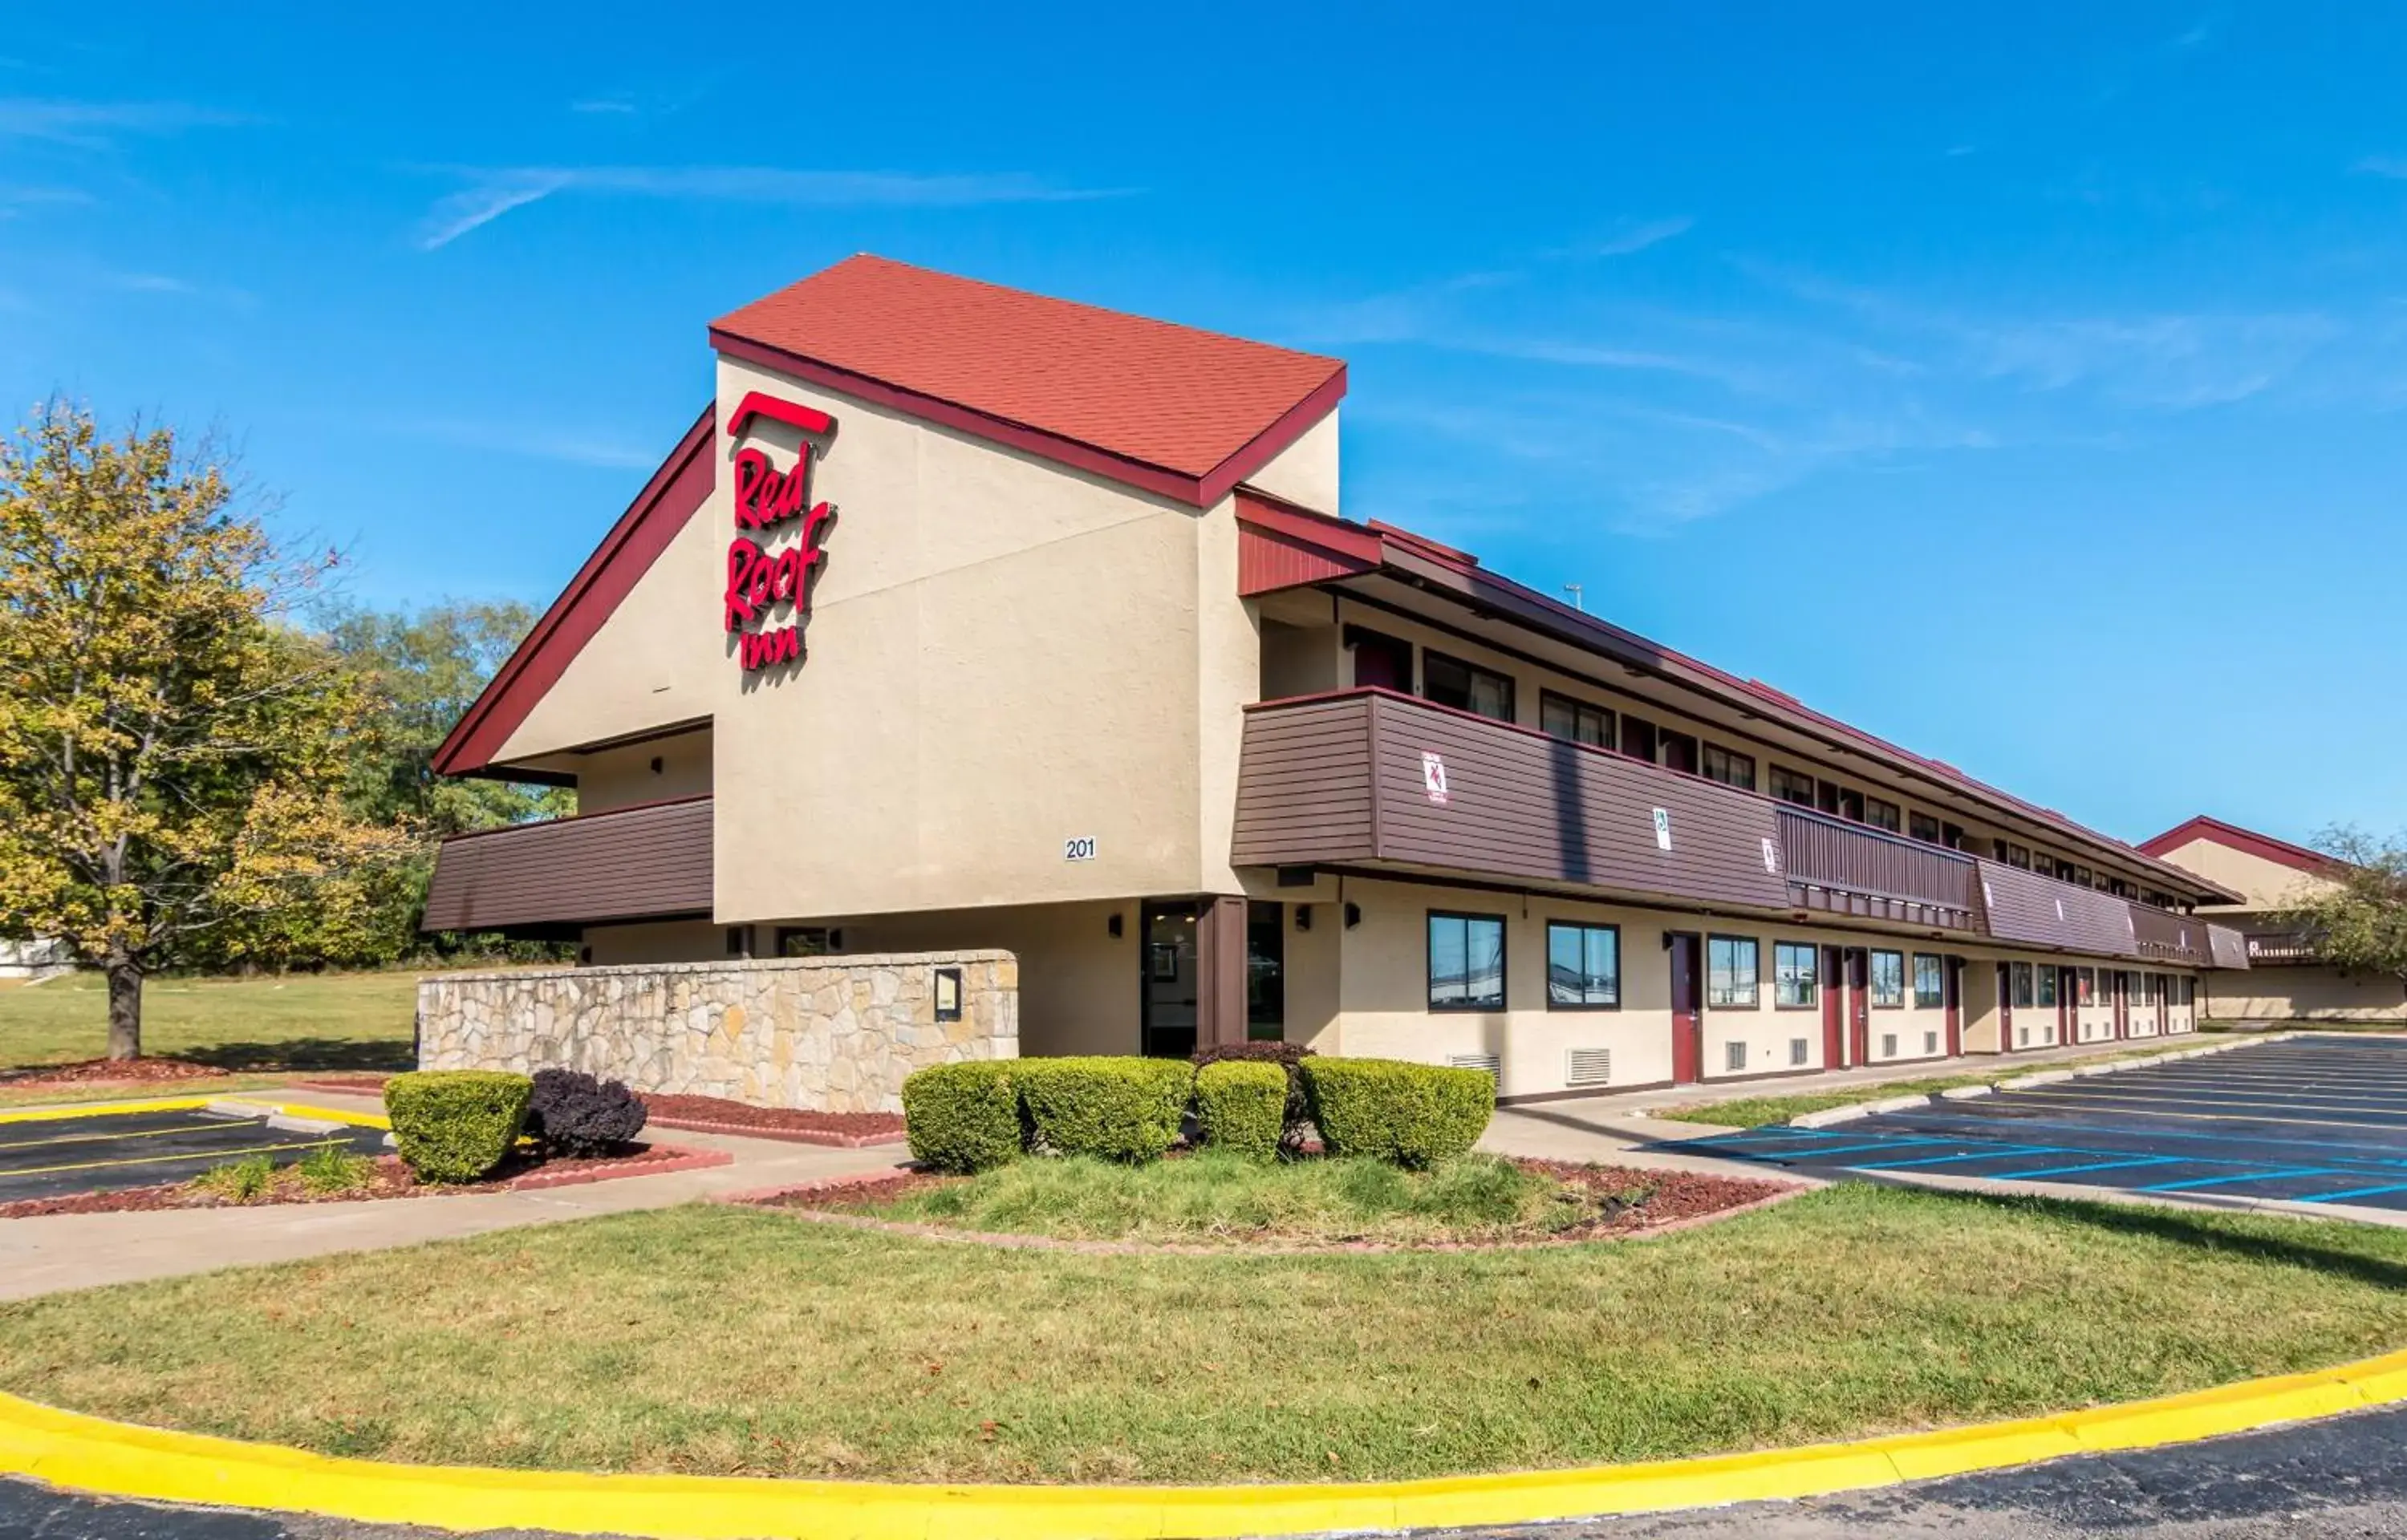 Property Building in Red Roof Inn Columbia, MO